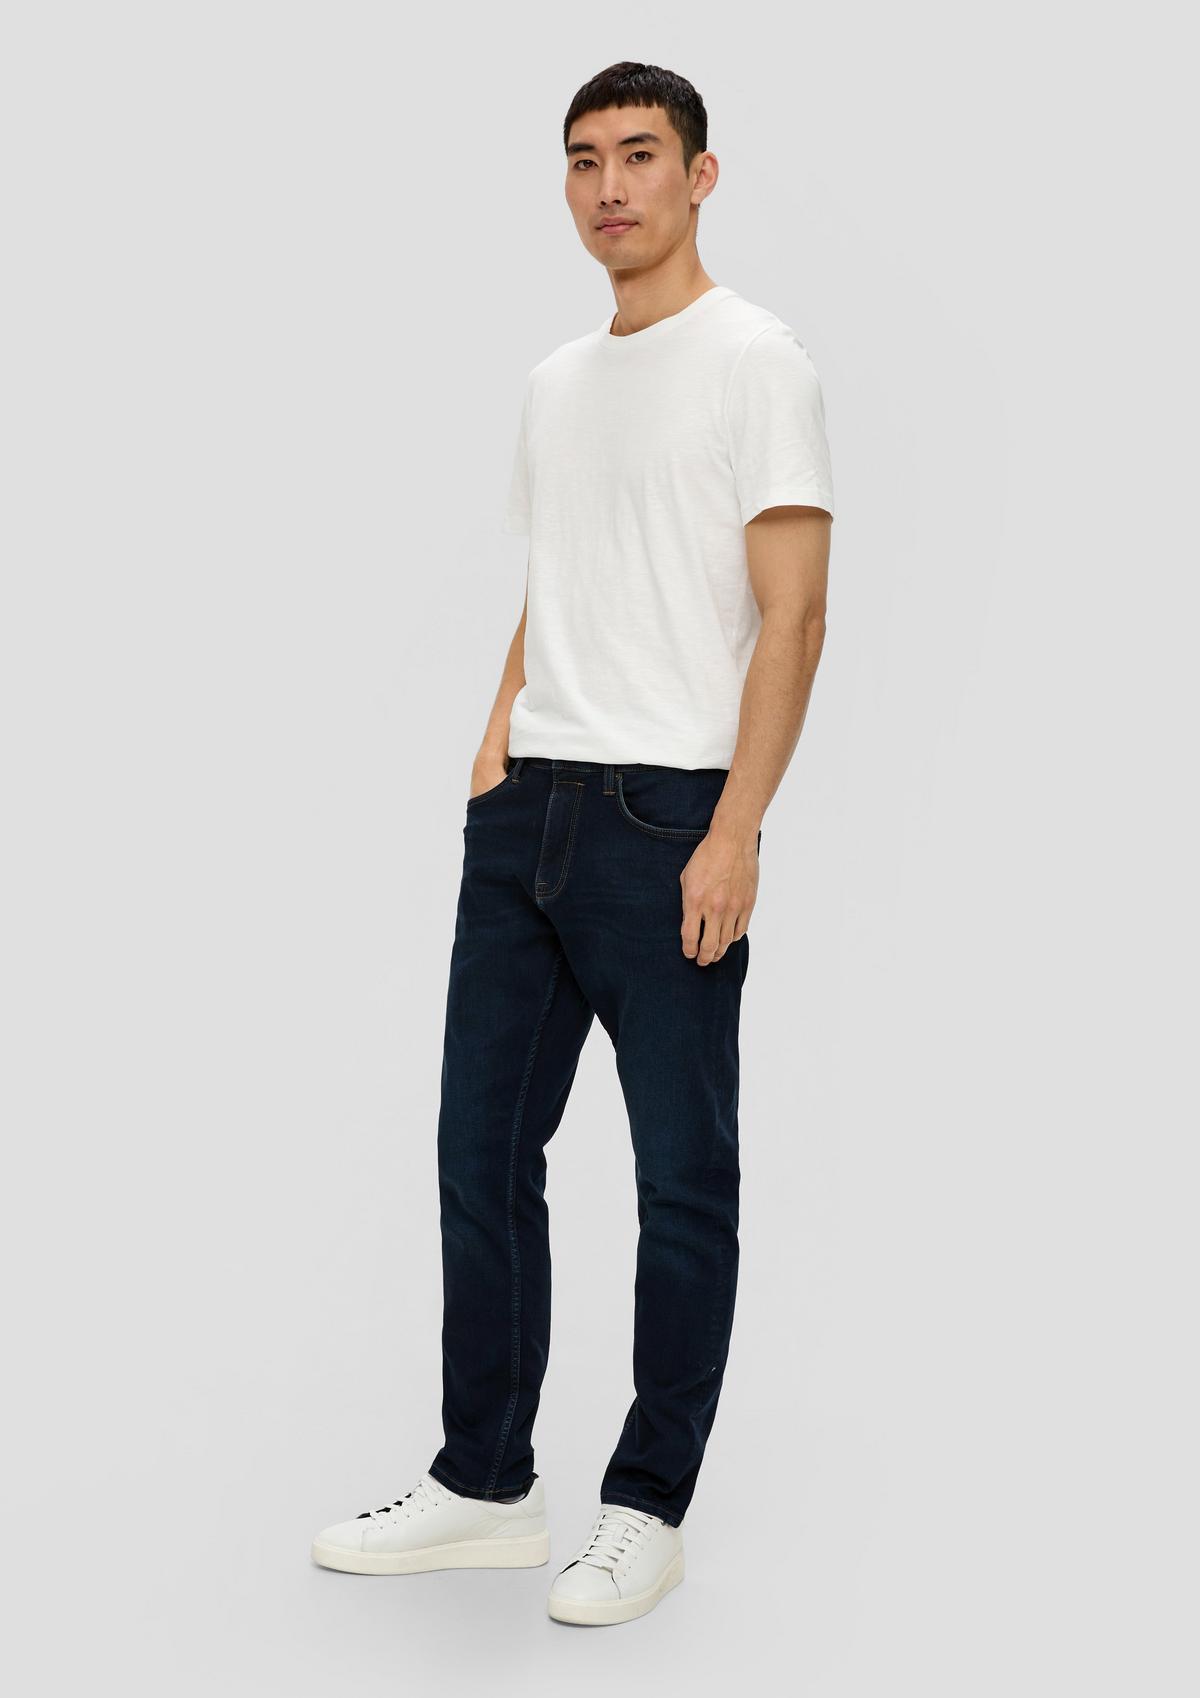 s.Oliver Jeans / regular fit / mid rise / tapered leg